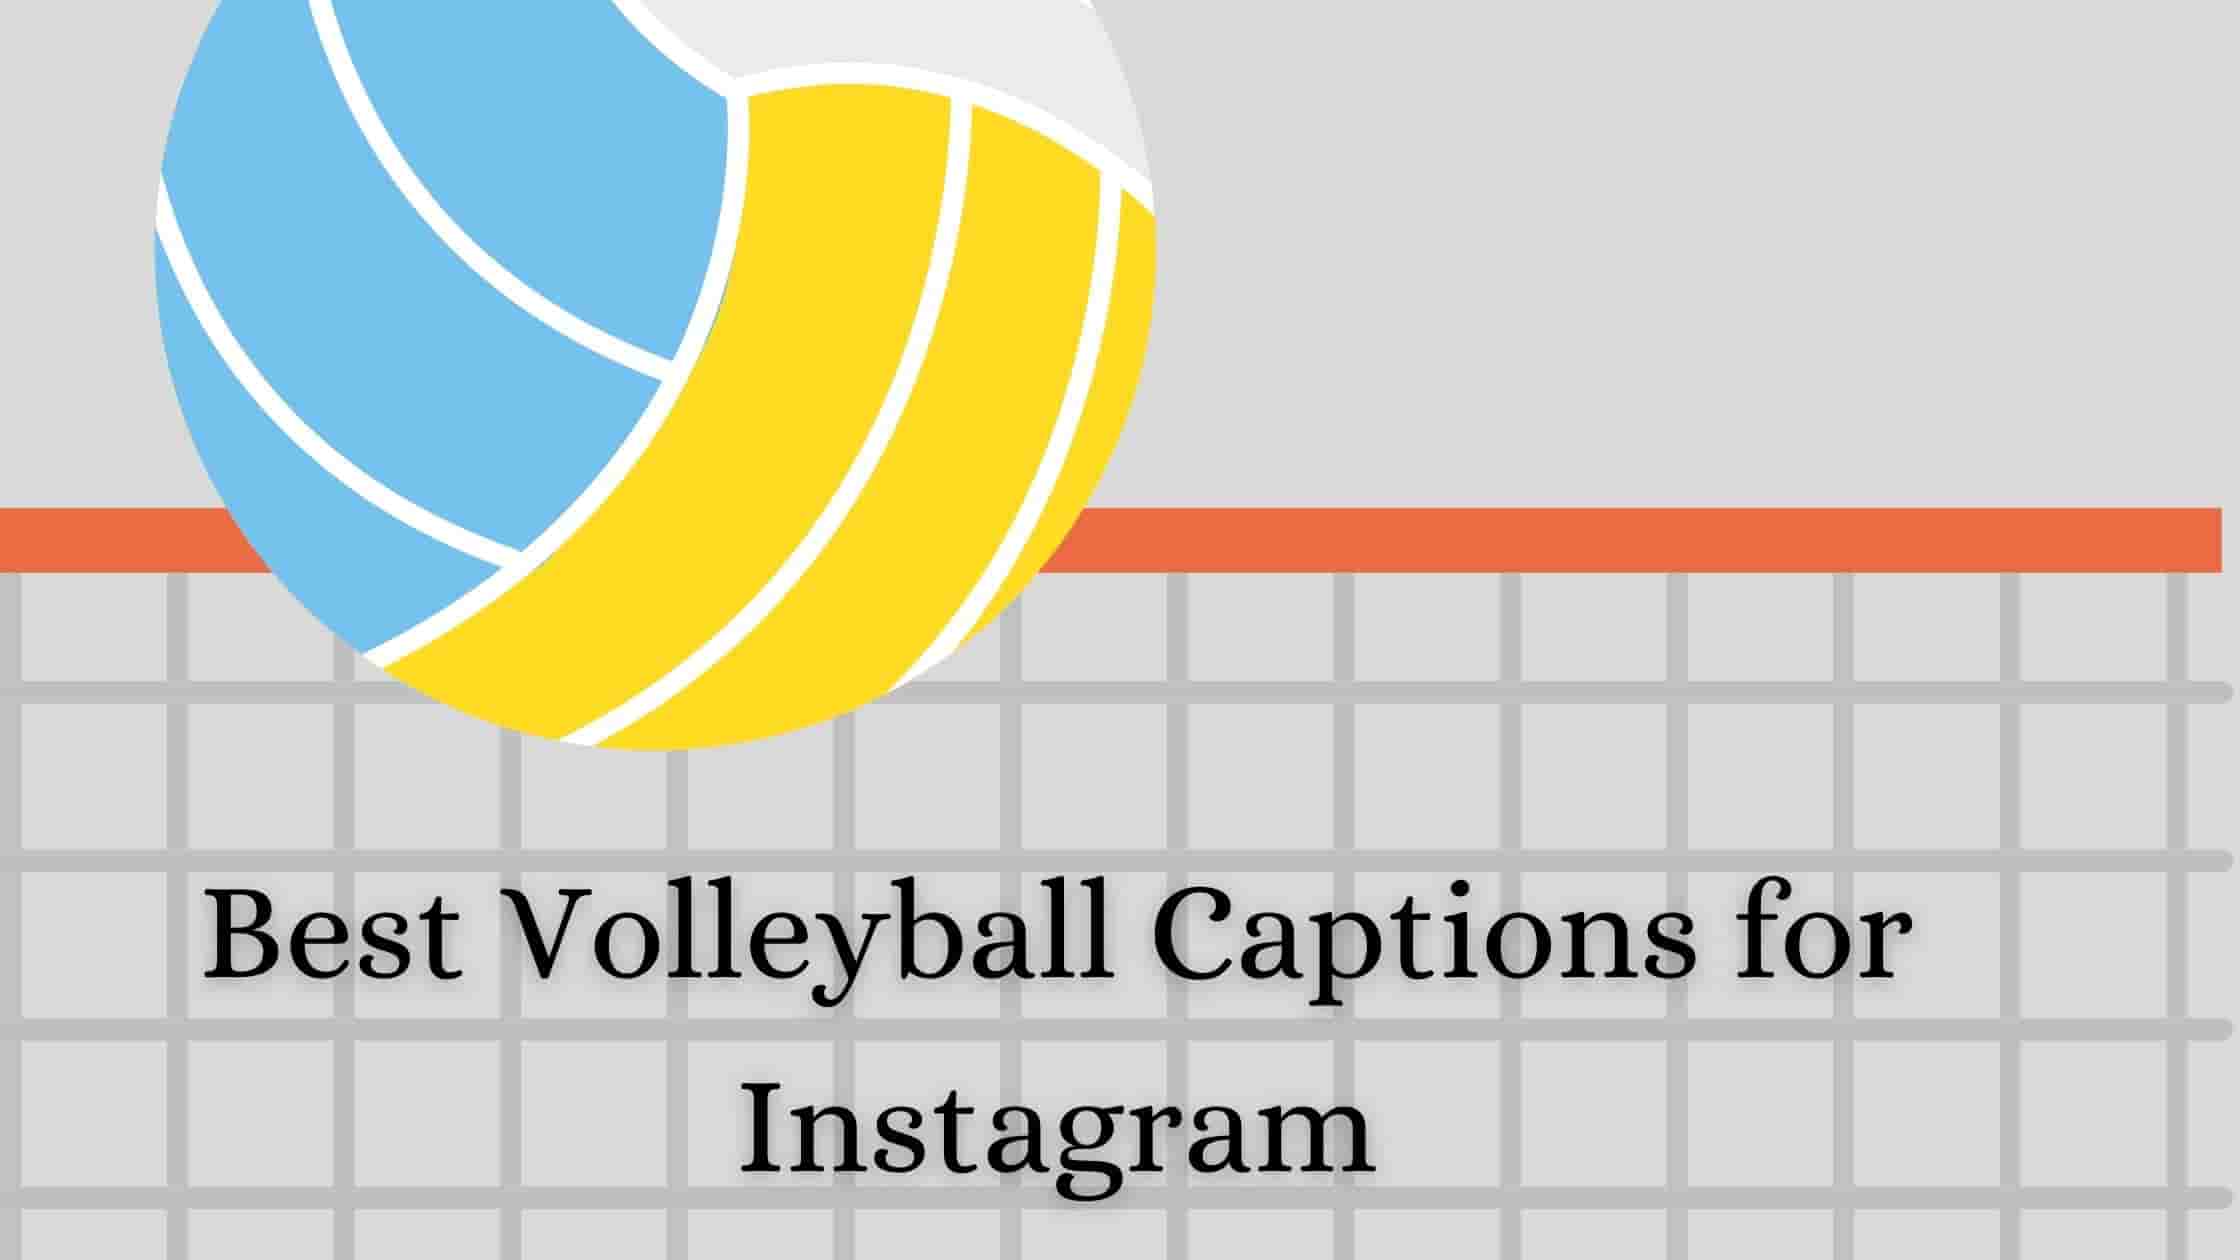 Volleyball Captions for Instagram